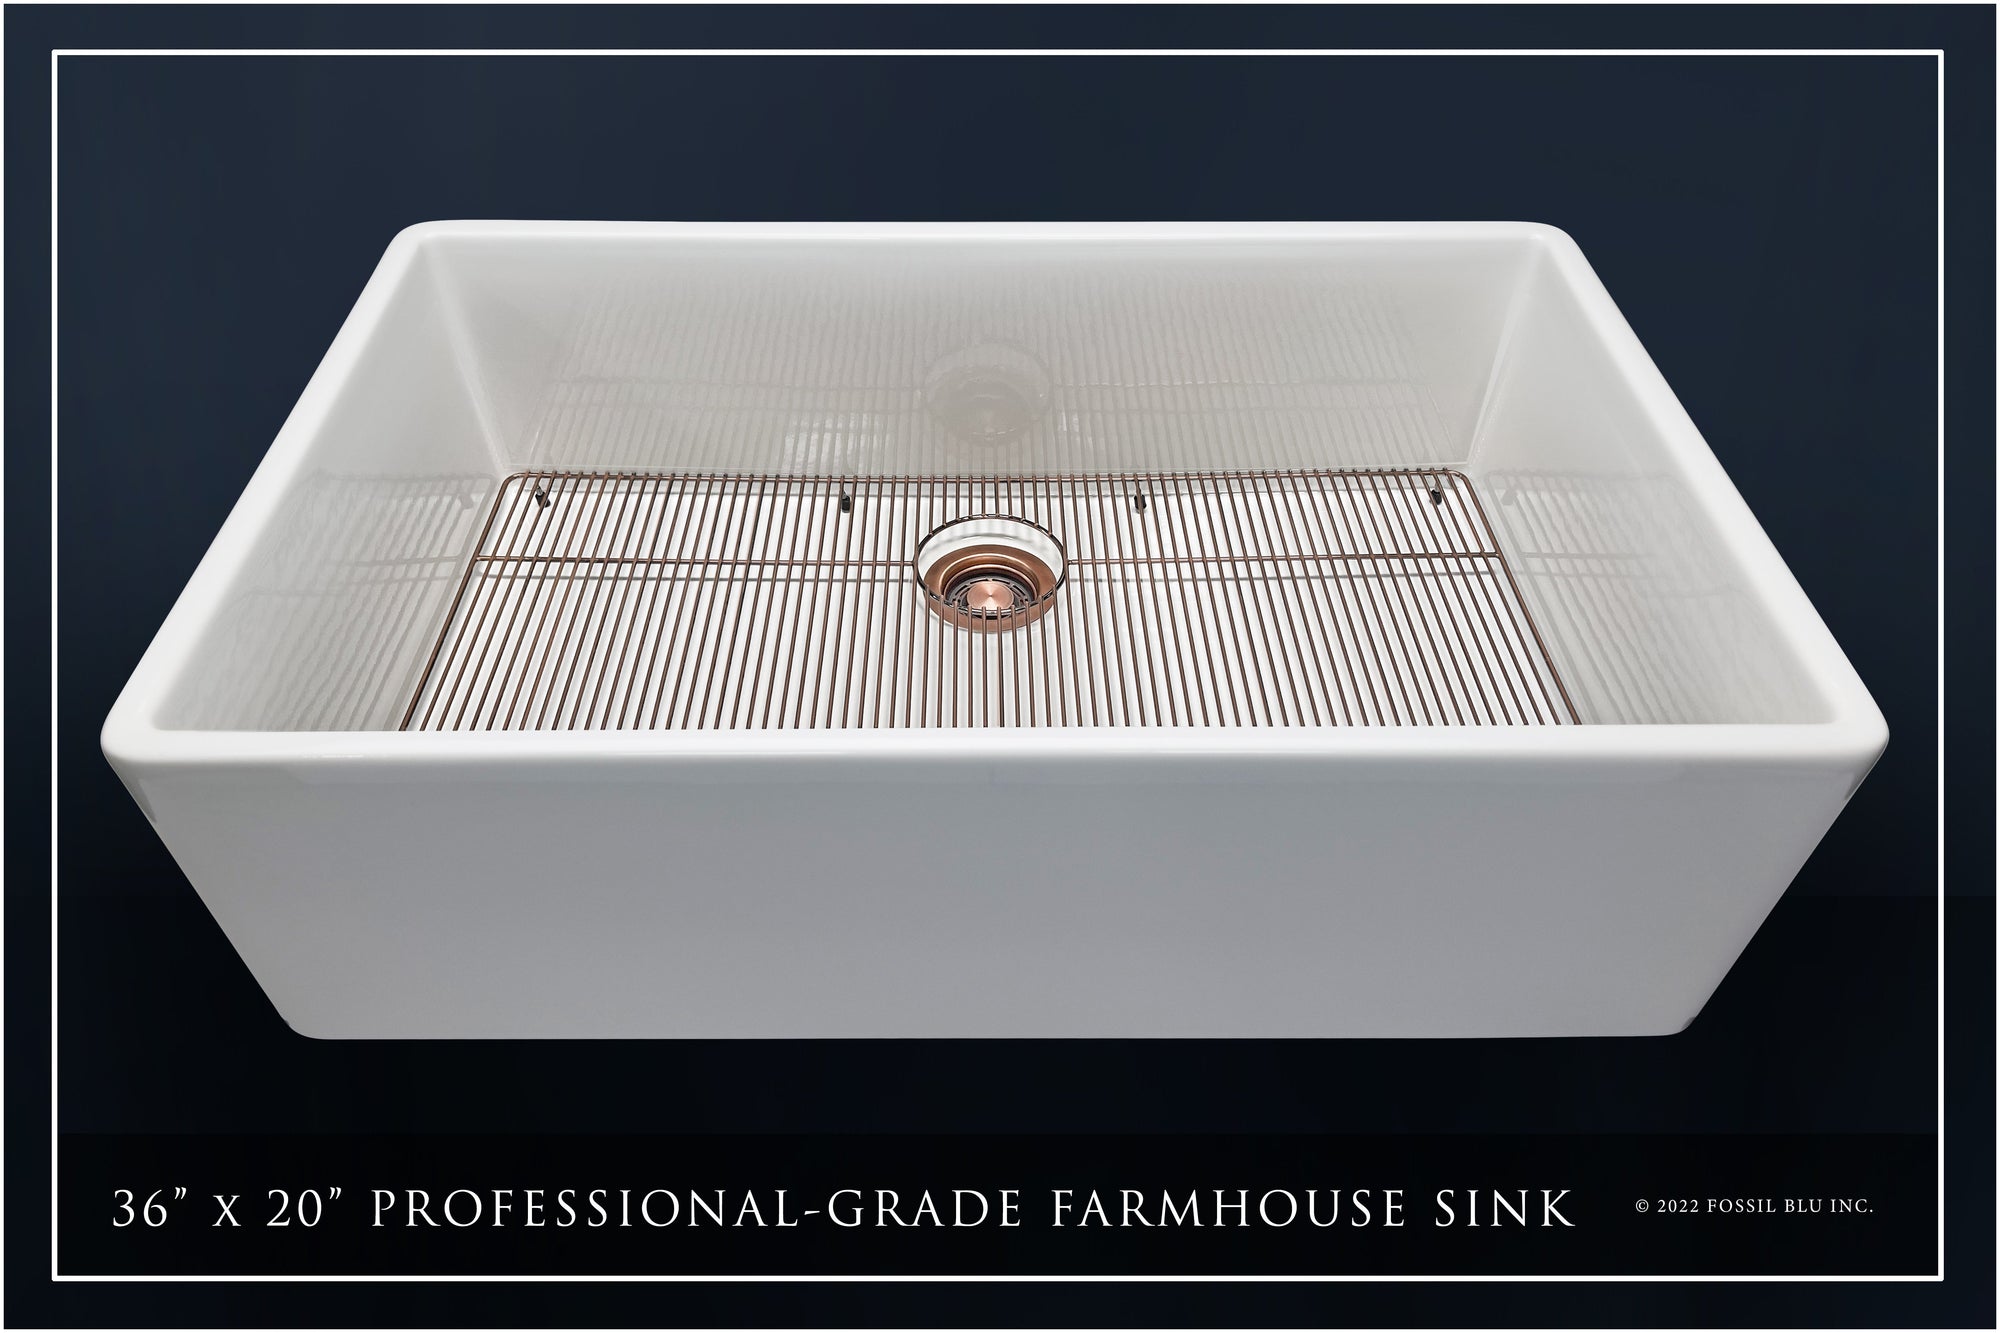 FSW1008AC LUXURY 36-INCH SOLID FIRECLAY FARMHOUSE SINK IN WHITE, ANTIQUE COPPER ACCS, FLAT FRONT